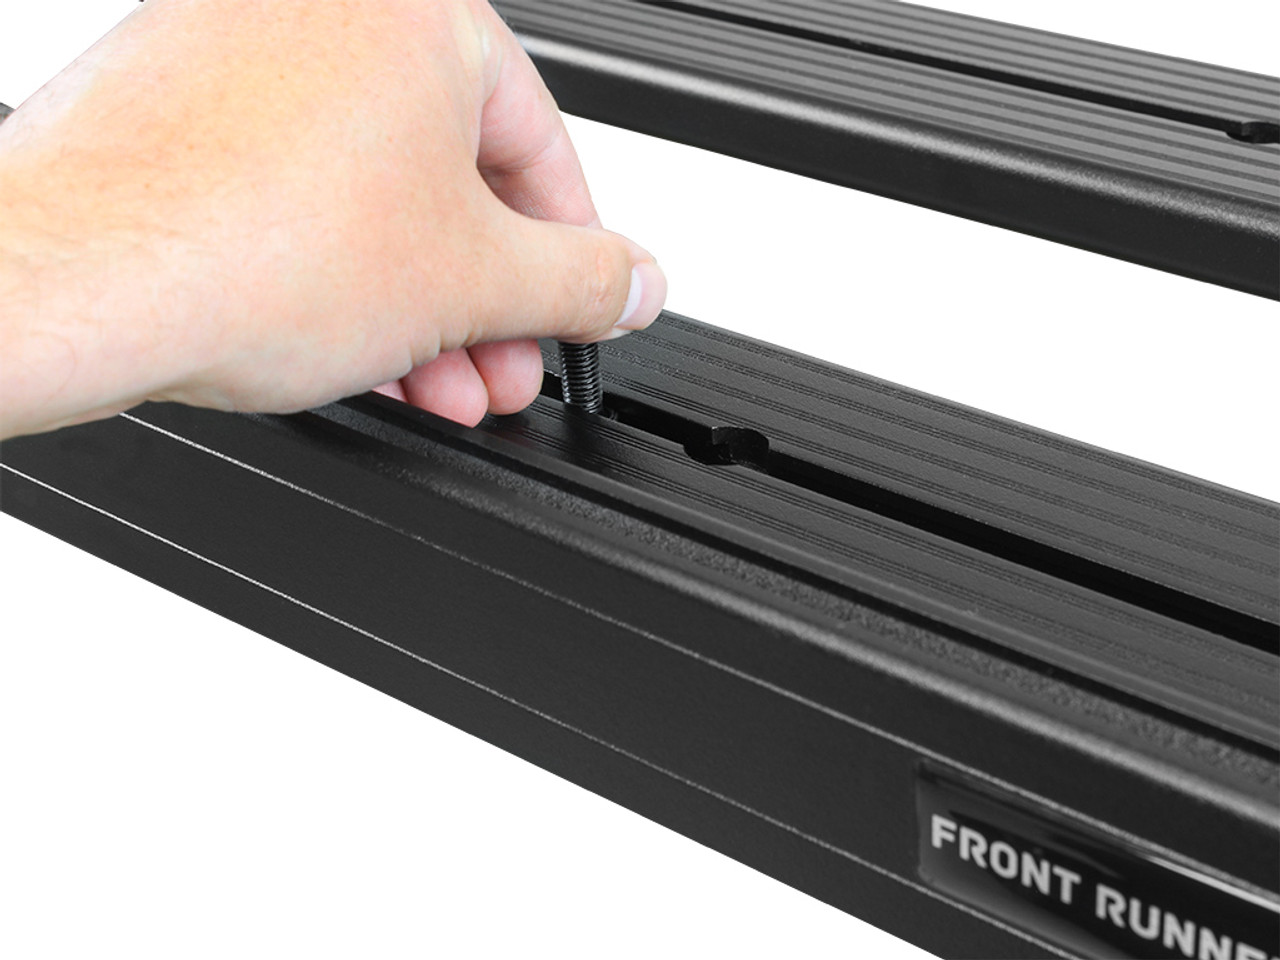 Ram 1500/2500/3500 Crew Cab (2009-Current) Slimline II Roof Rack Kit / Low Profile - by Front Runner